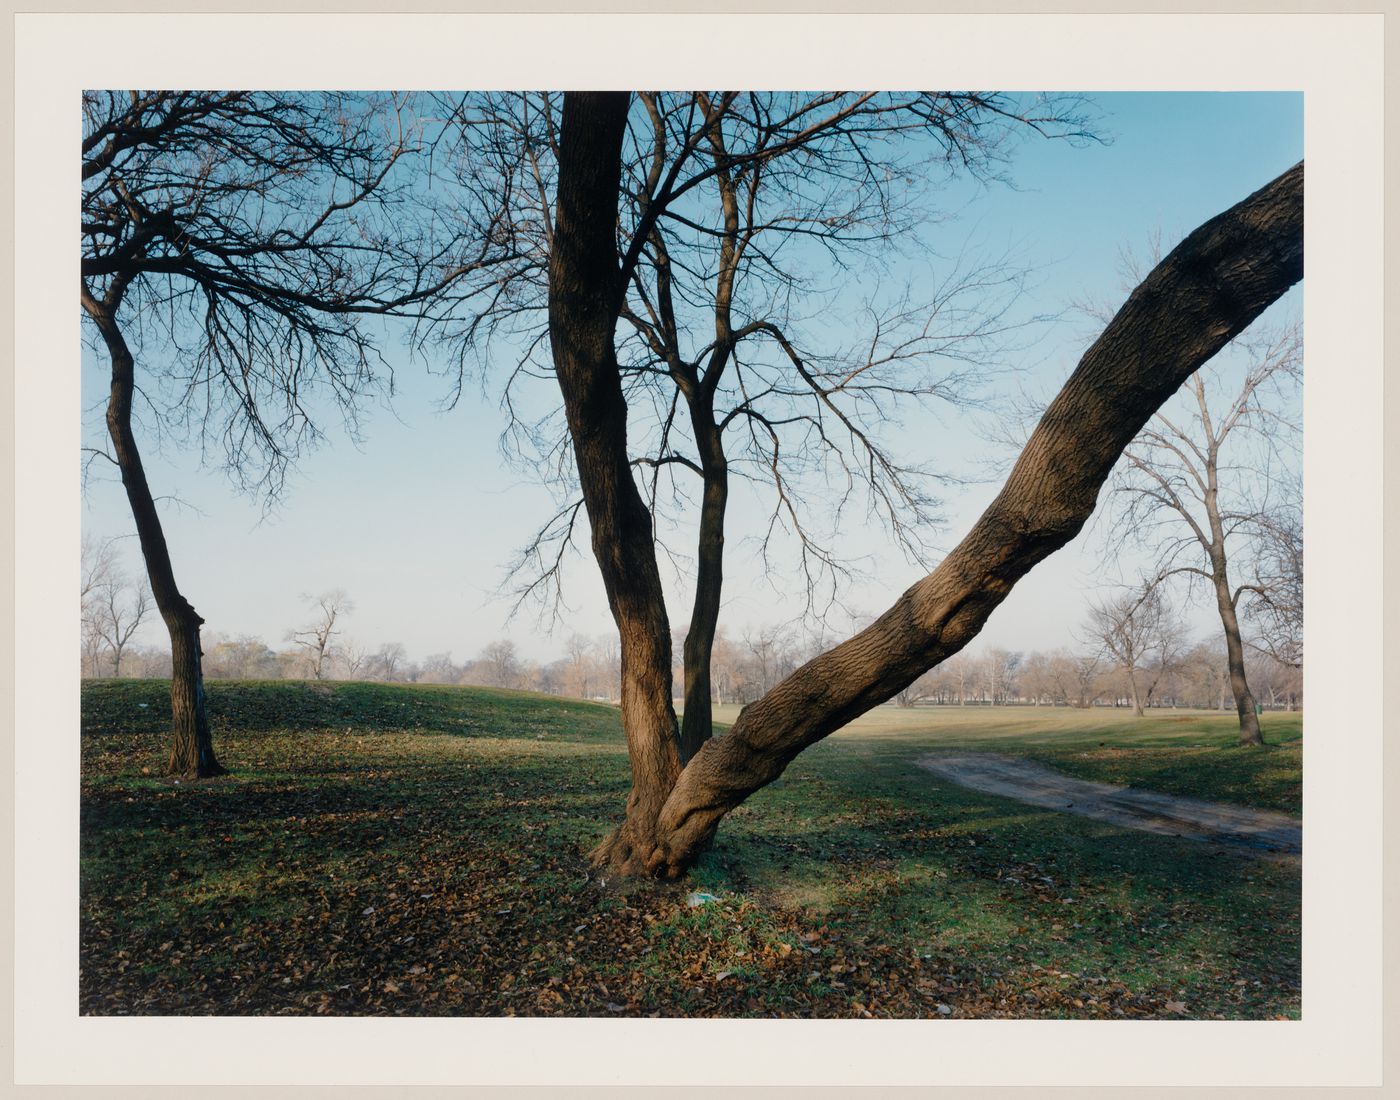 Viewing Olmsted: View of East side of park, Washington Park, Chicago, Illinois